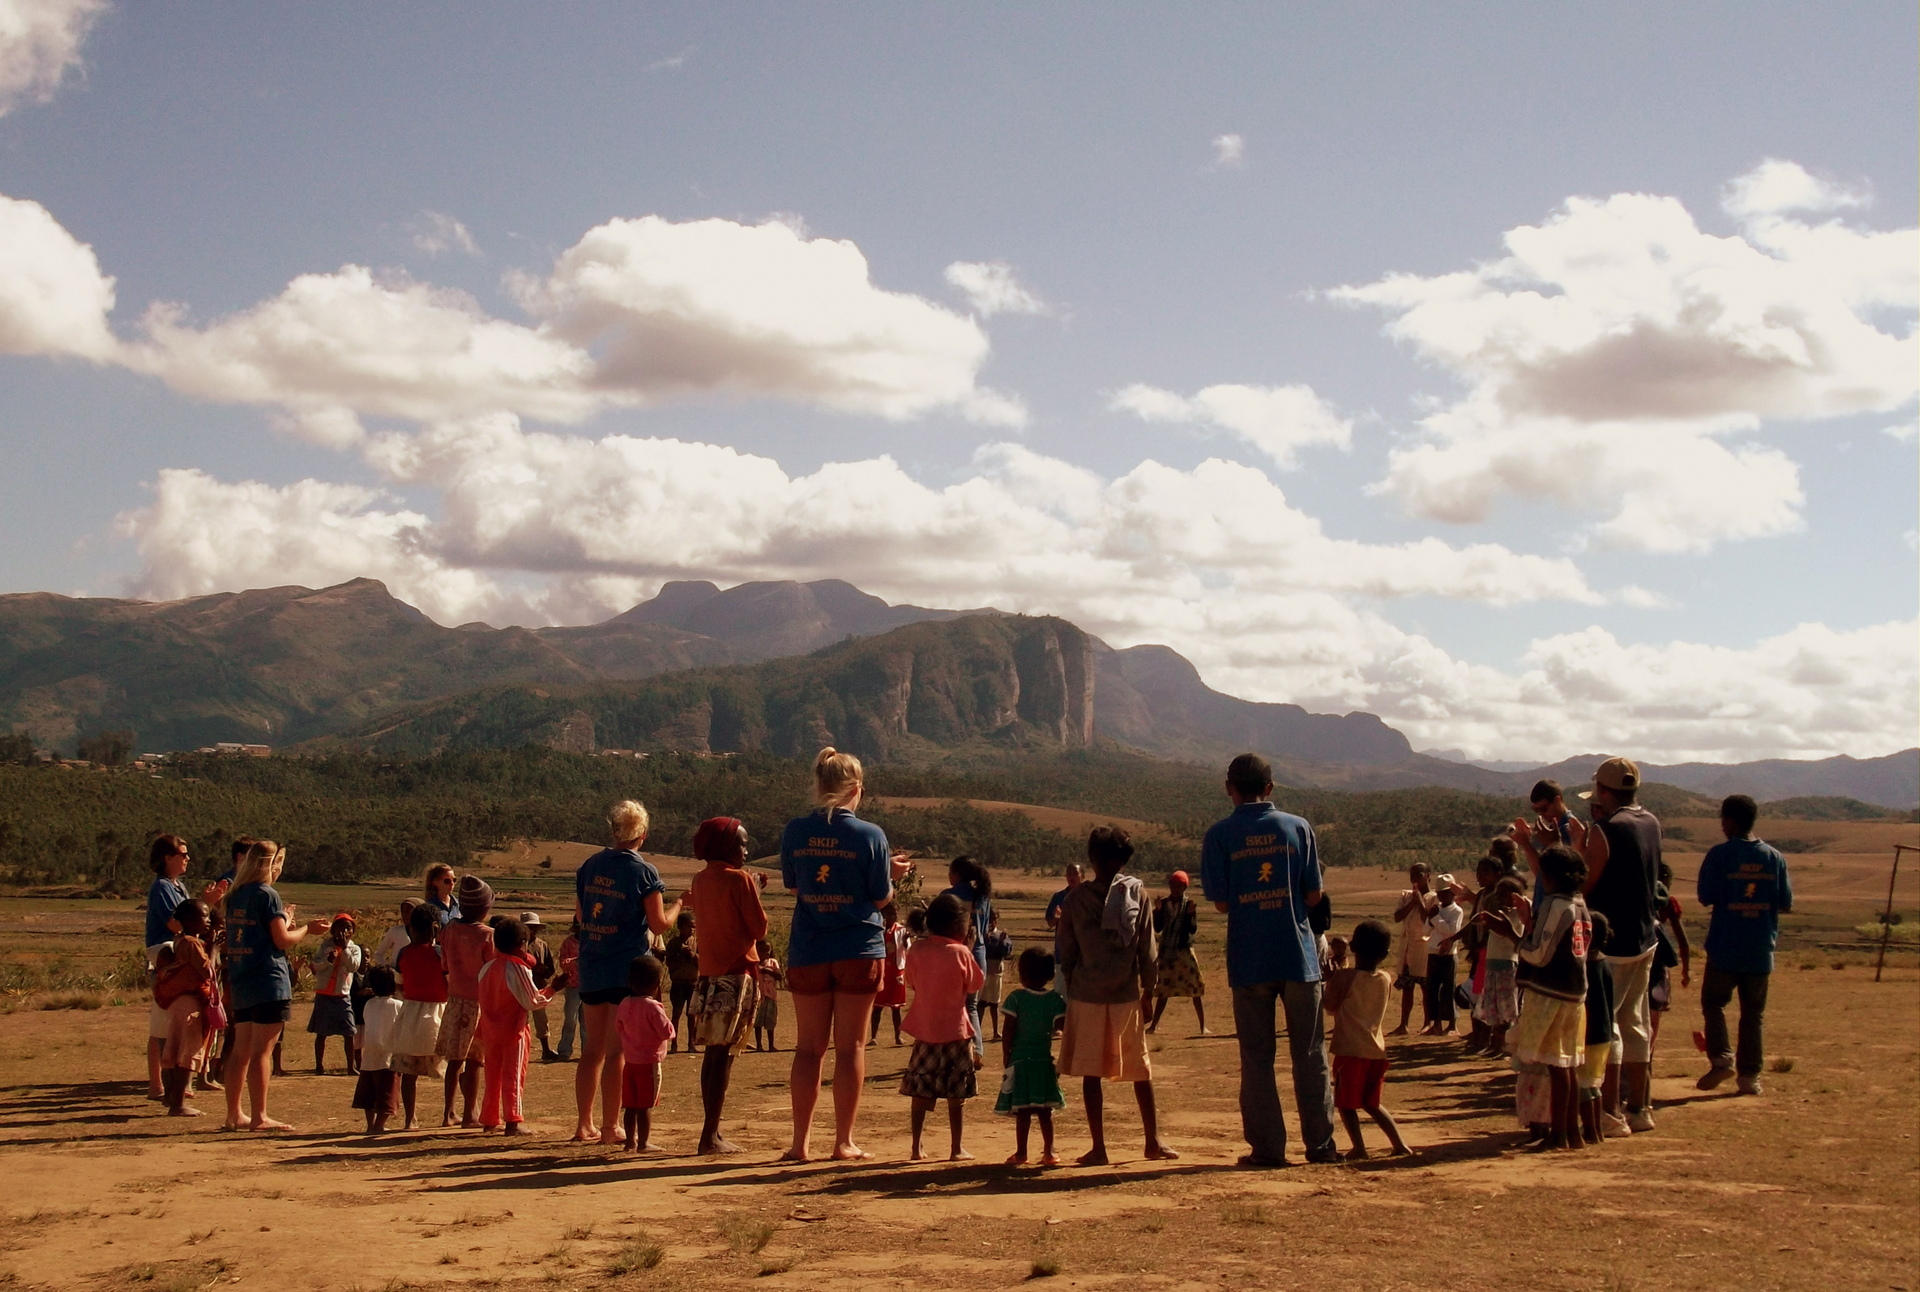 A group of SKIP volunteers stand in a circle with children, teaching them a game,They are stood in a desert, mountainous area